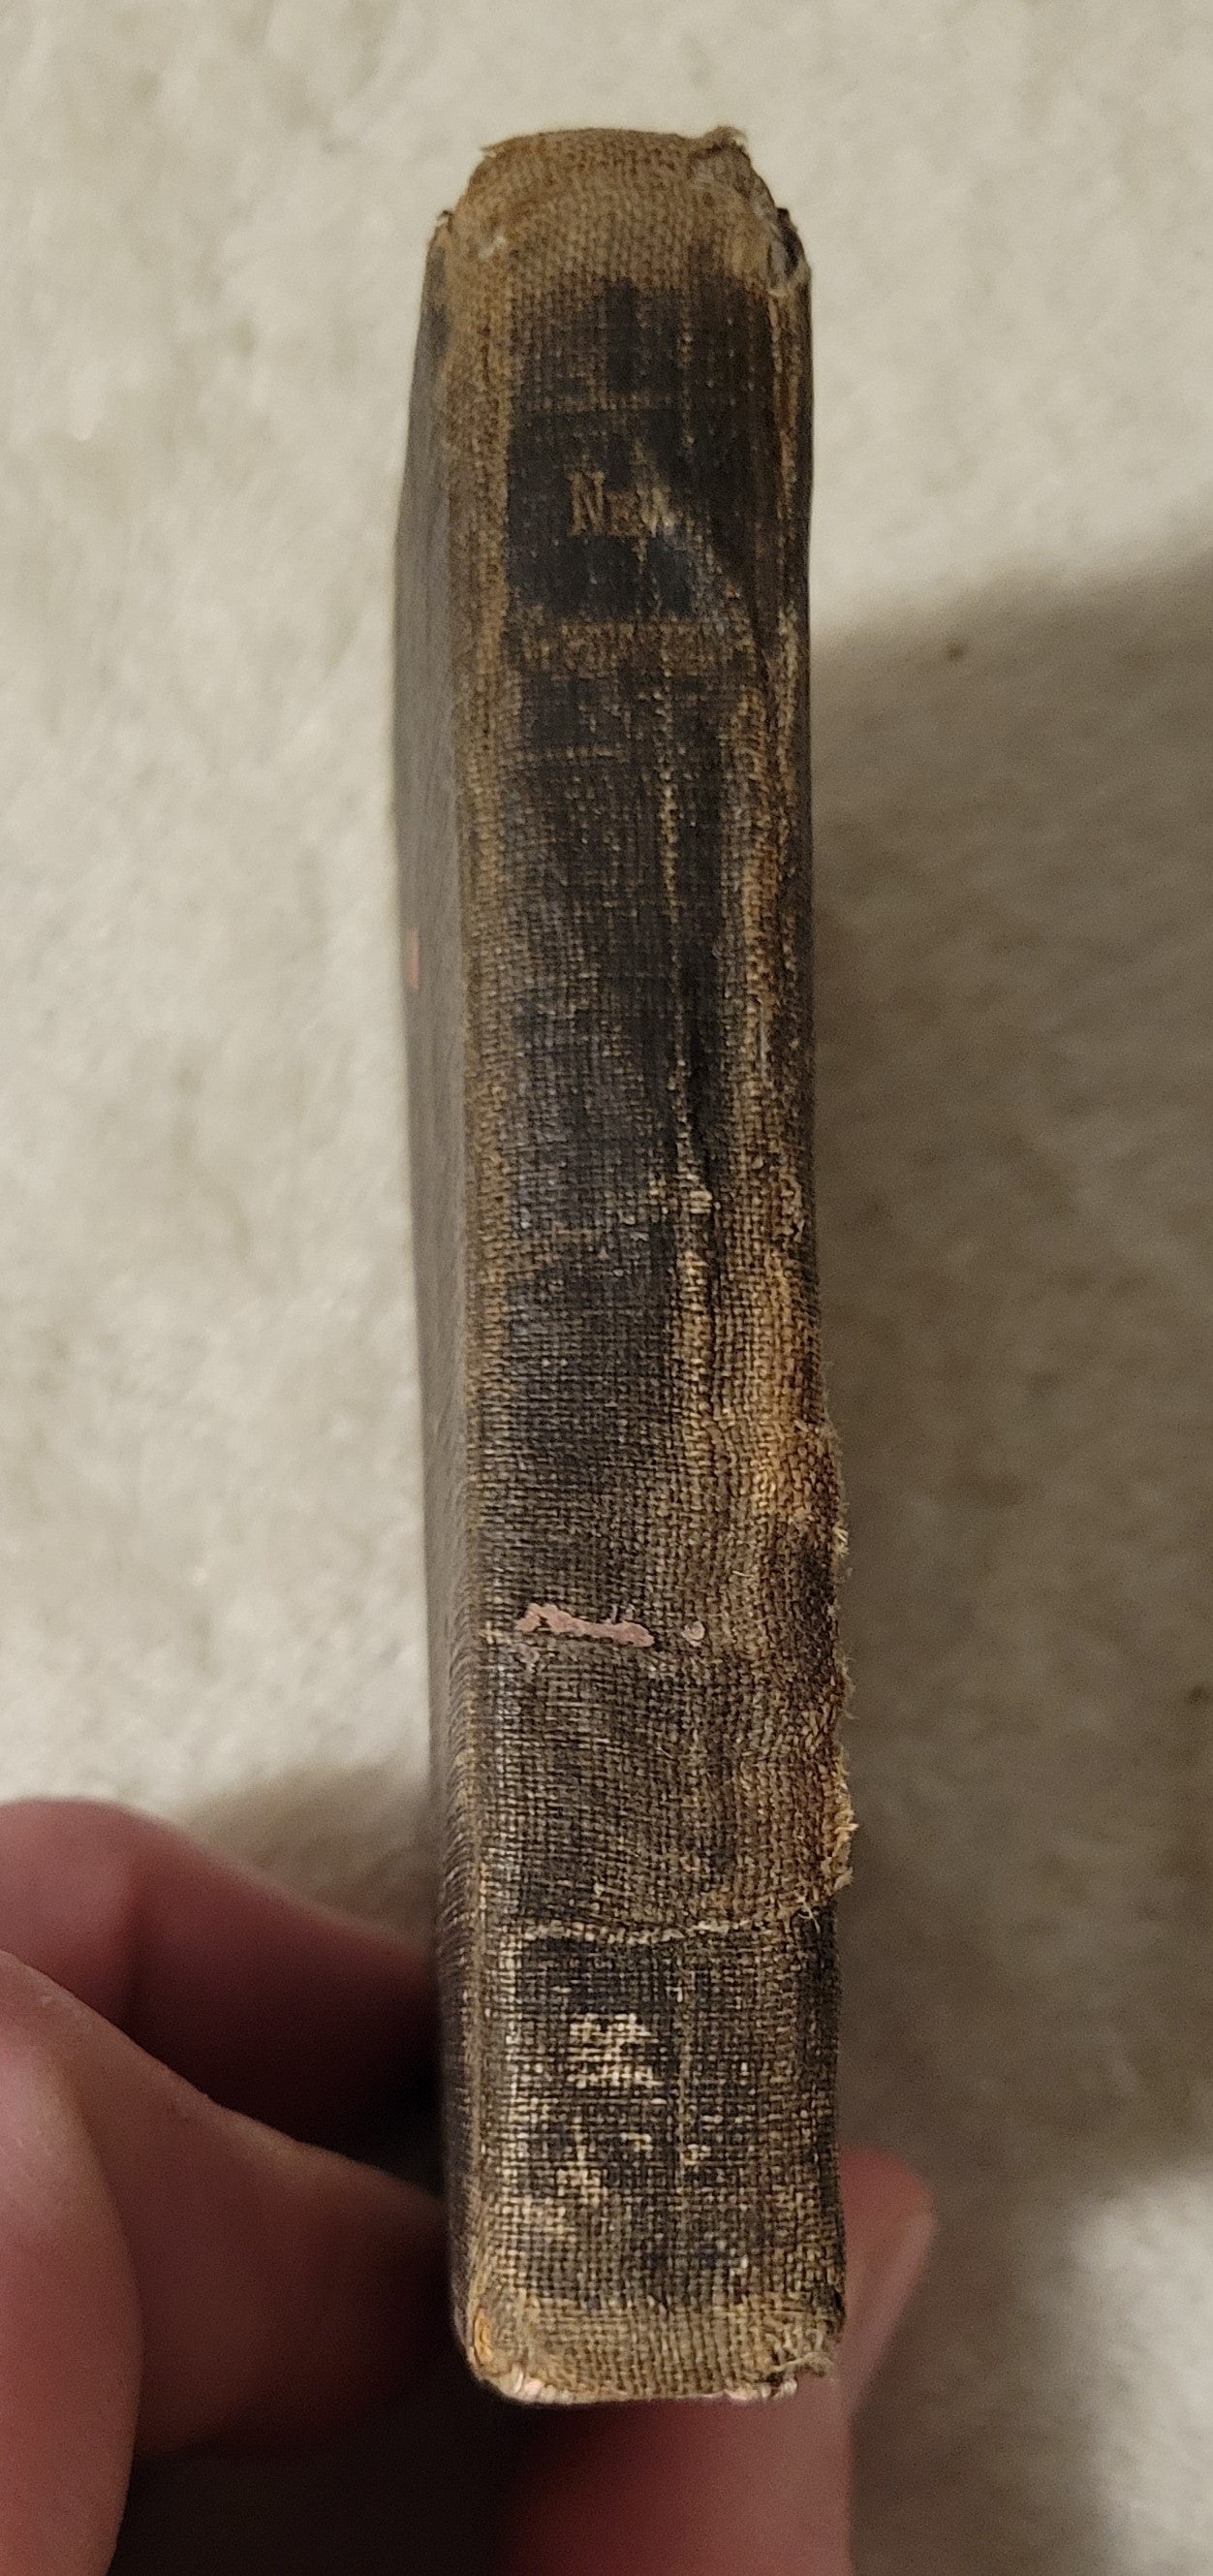 Antique book for sale, illustrated New Testament, 1918.  View of spine